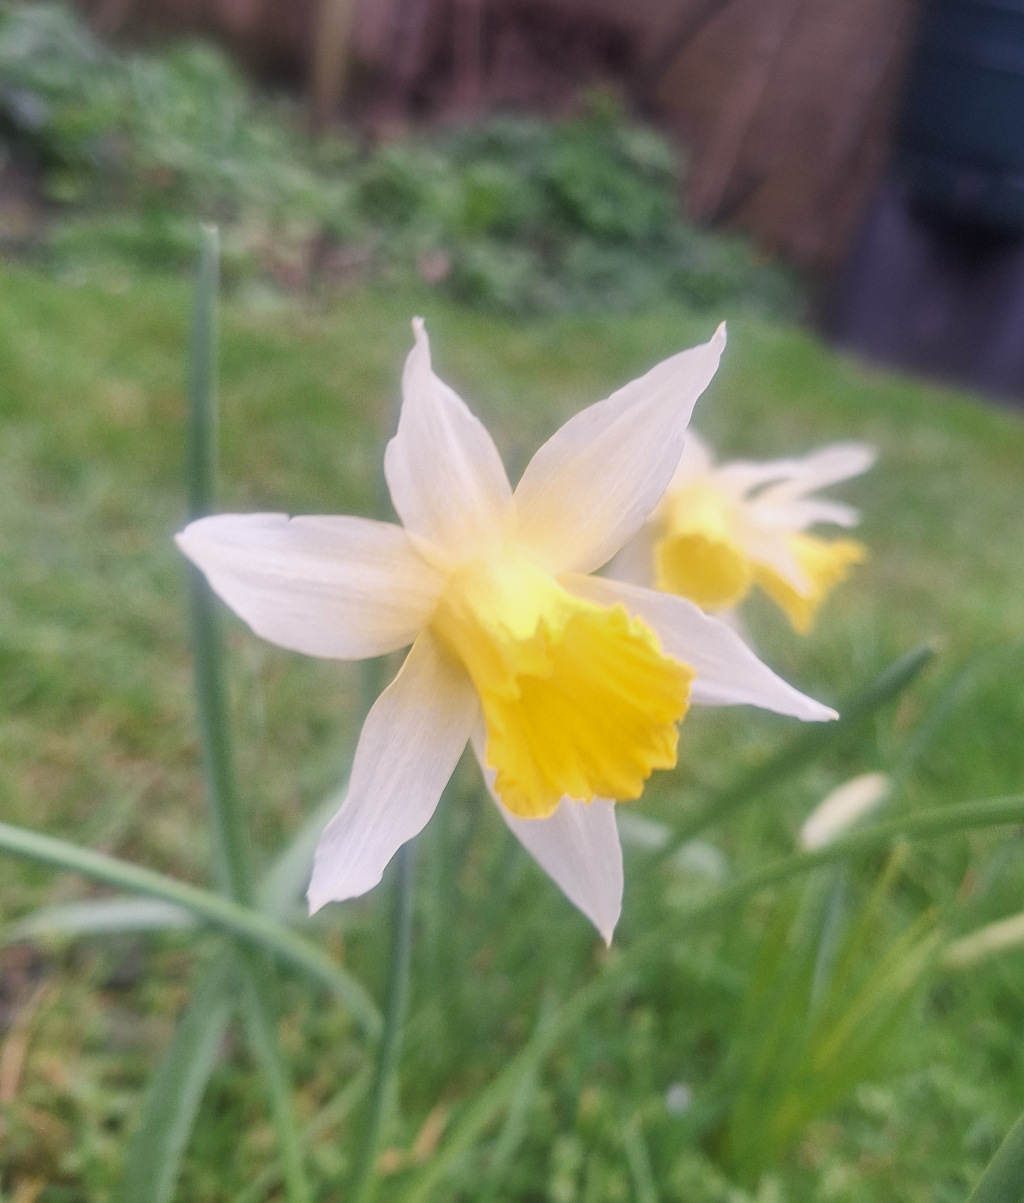 White and yellow daffodil lent lily